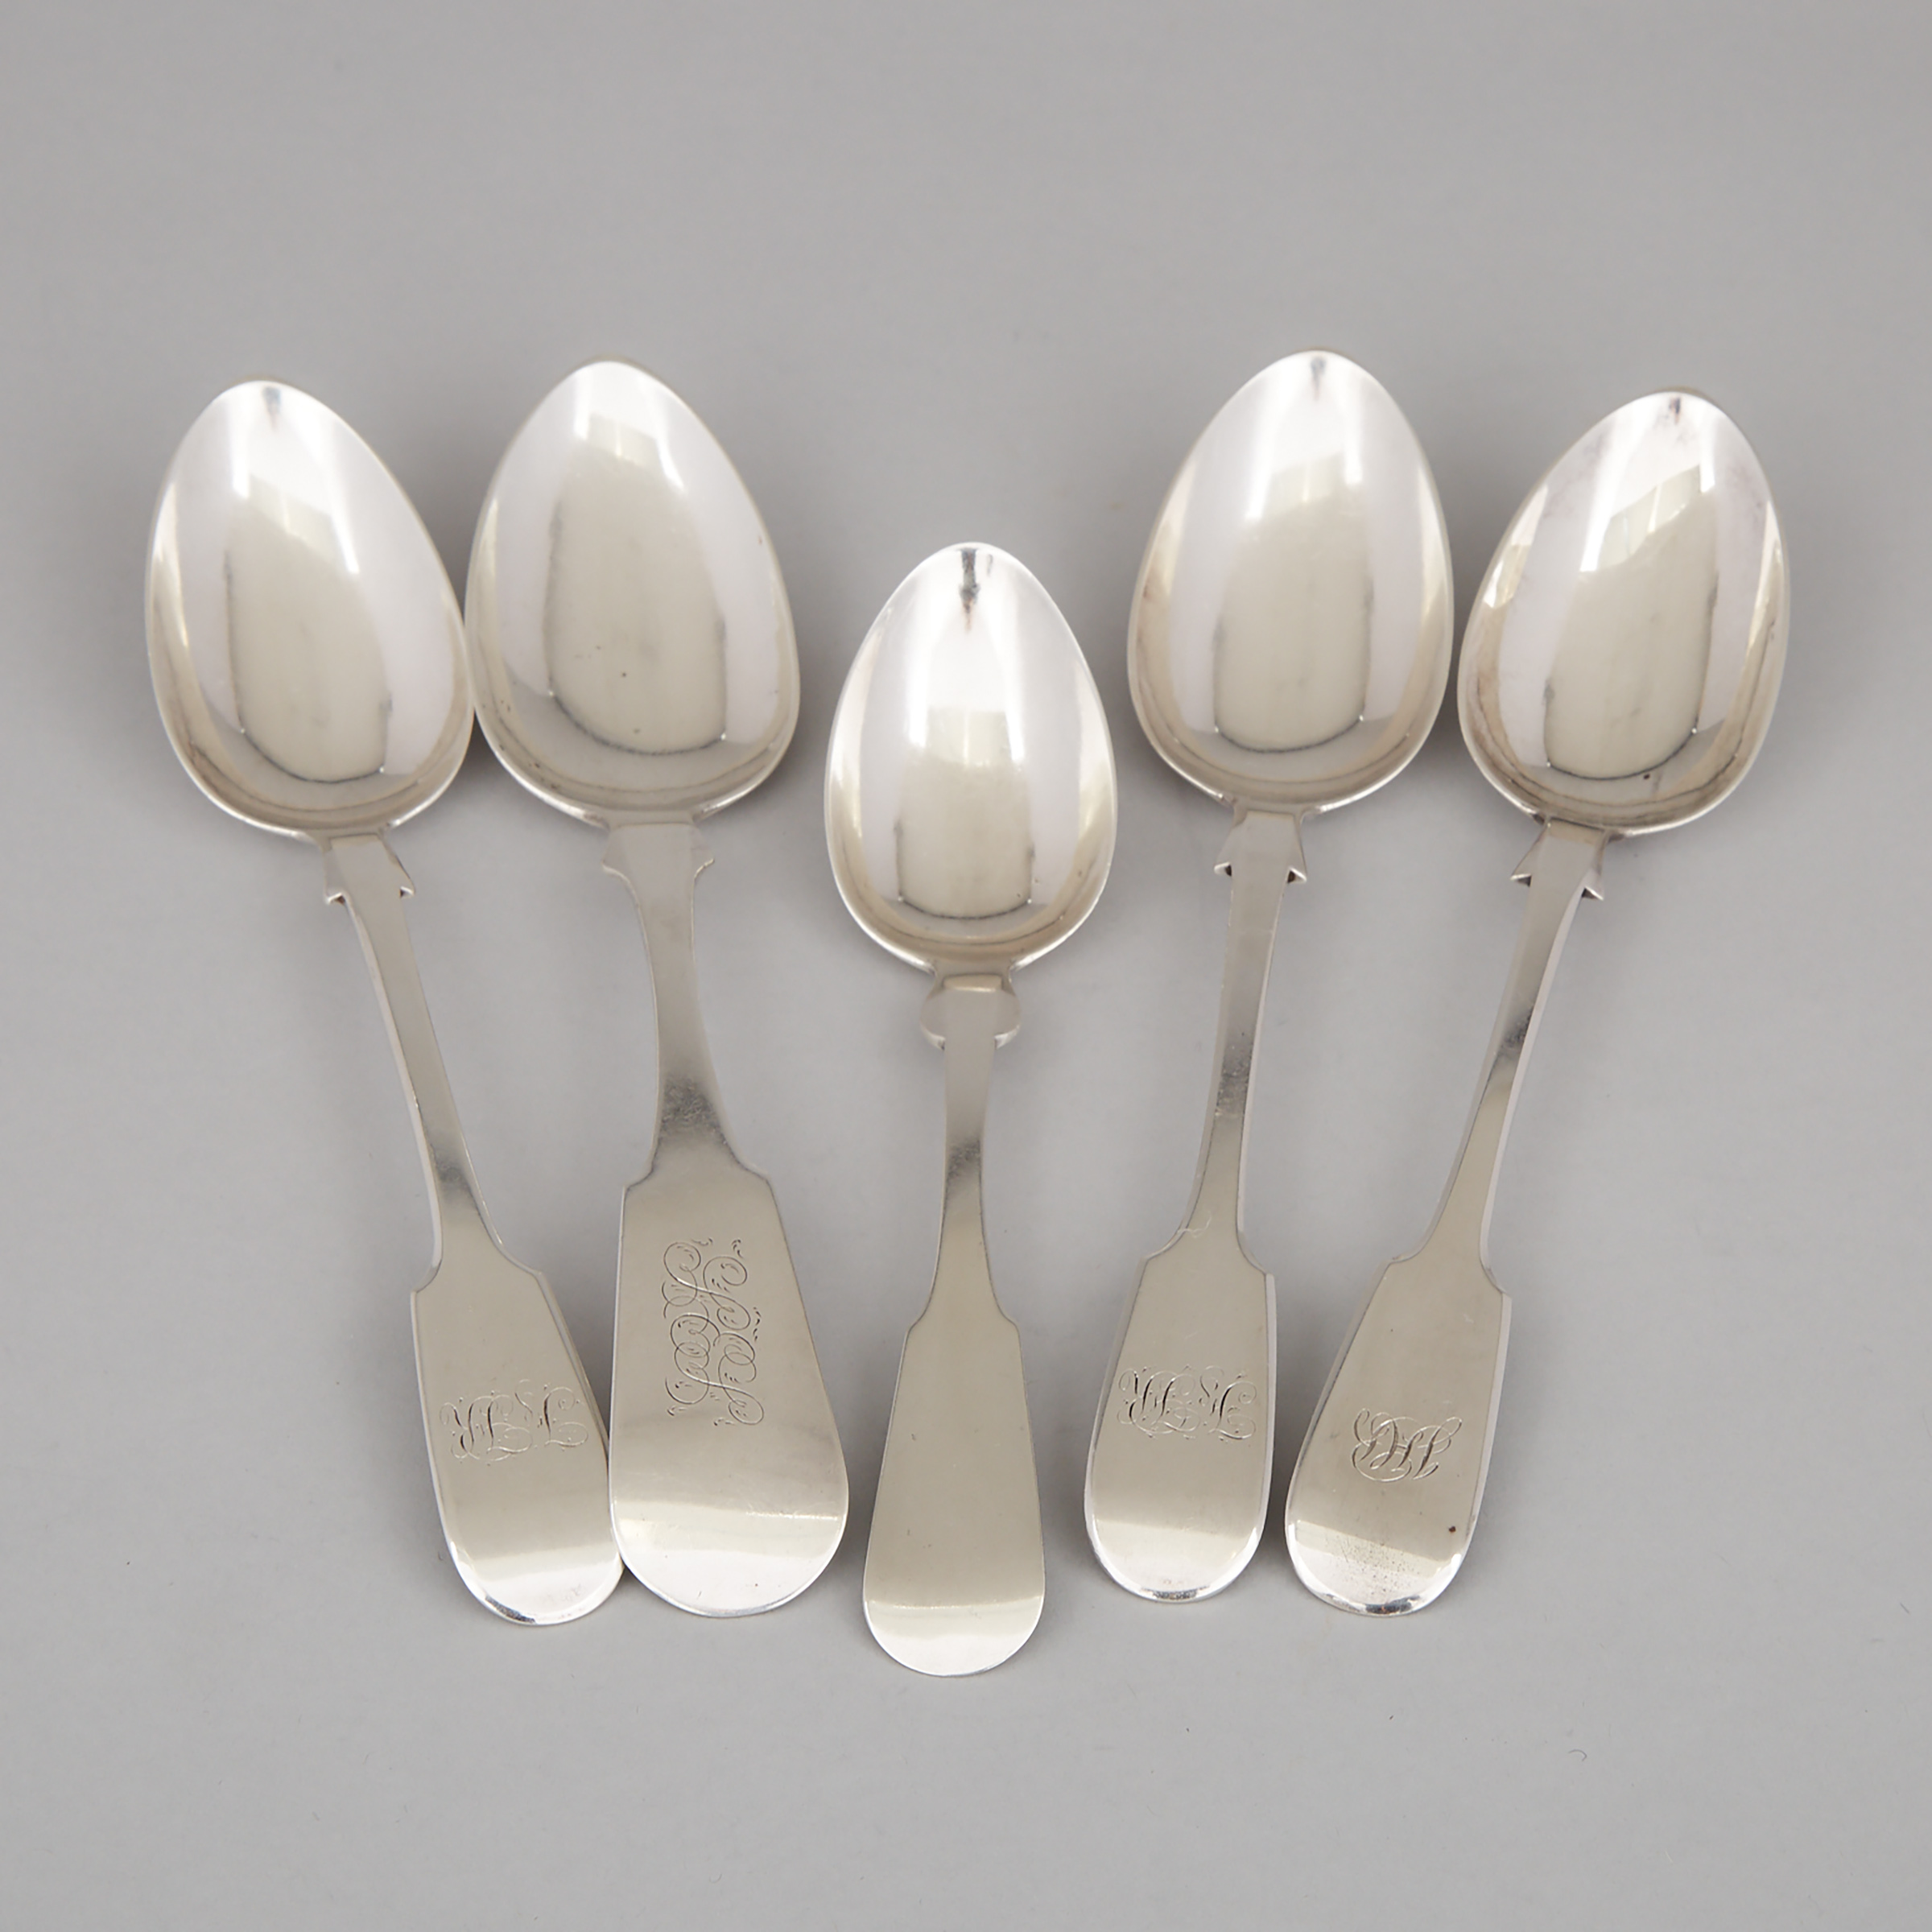 Four Canadian Silver Table Spoons and a Dessert Spoon, Savage, Lyman & Co., Montreal, Que. (3), William Norris Venning (1) and Albert & John Hay (1), Saint John, N.B., second half of the 19th century